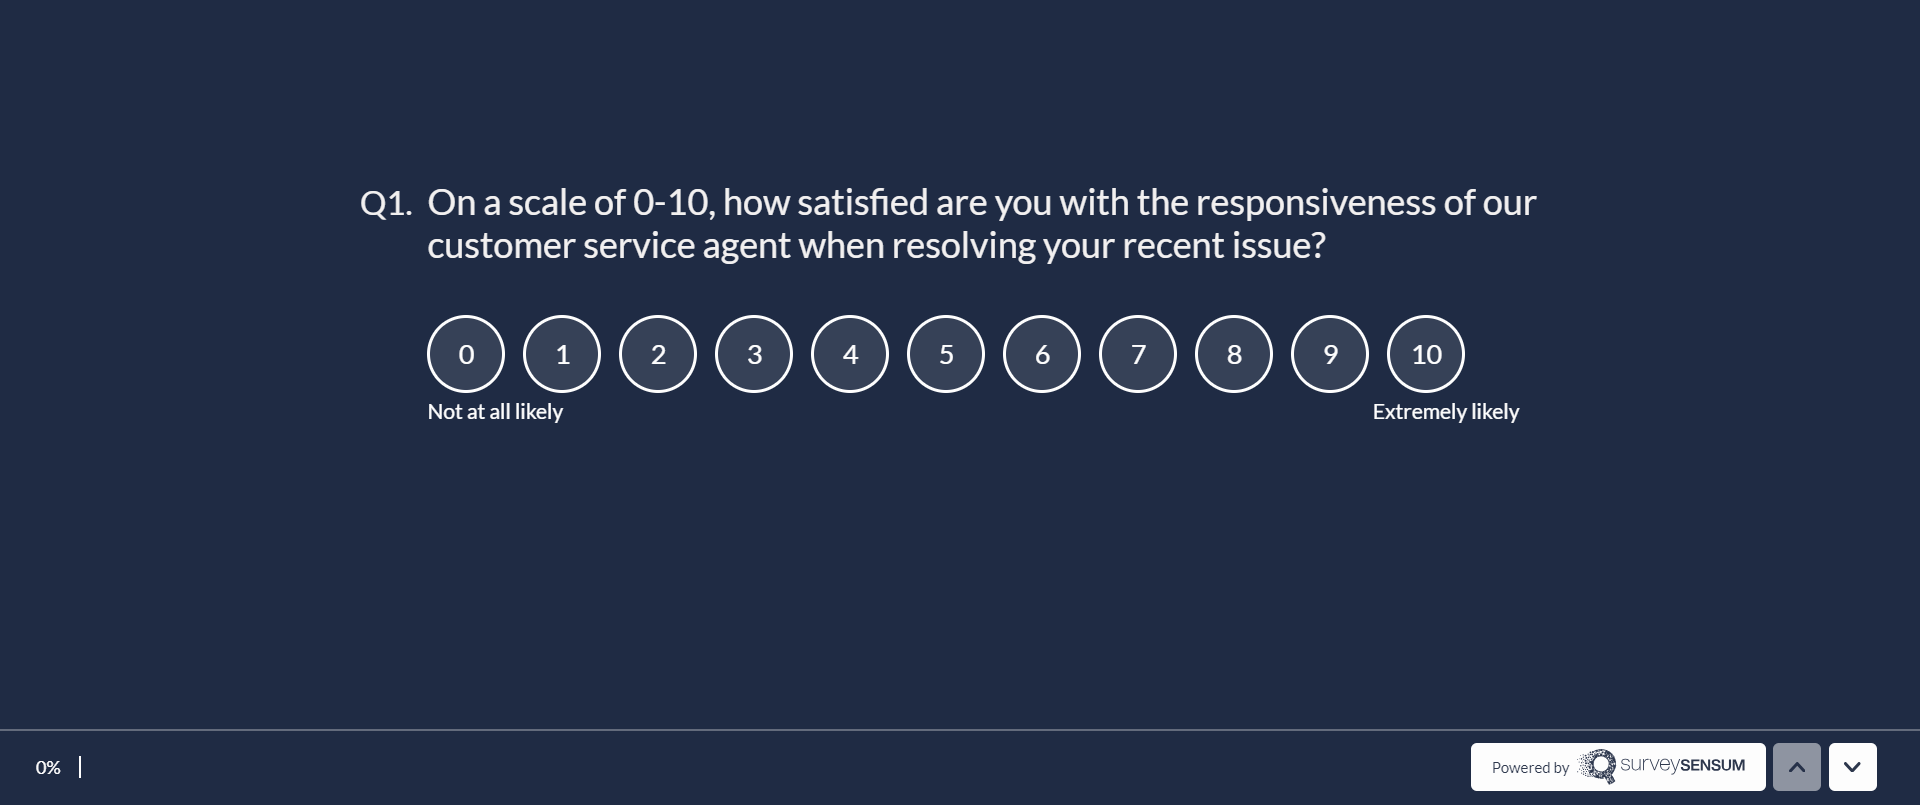 The image shows an example of an unbiased CSAT survey question where the customer is being asked to rate their experience with the customer service agent responsiveness in resolving a recent issue.